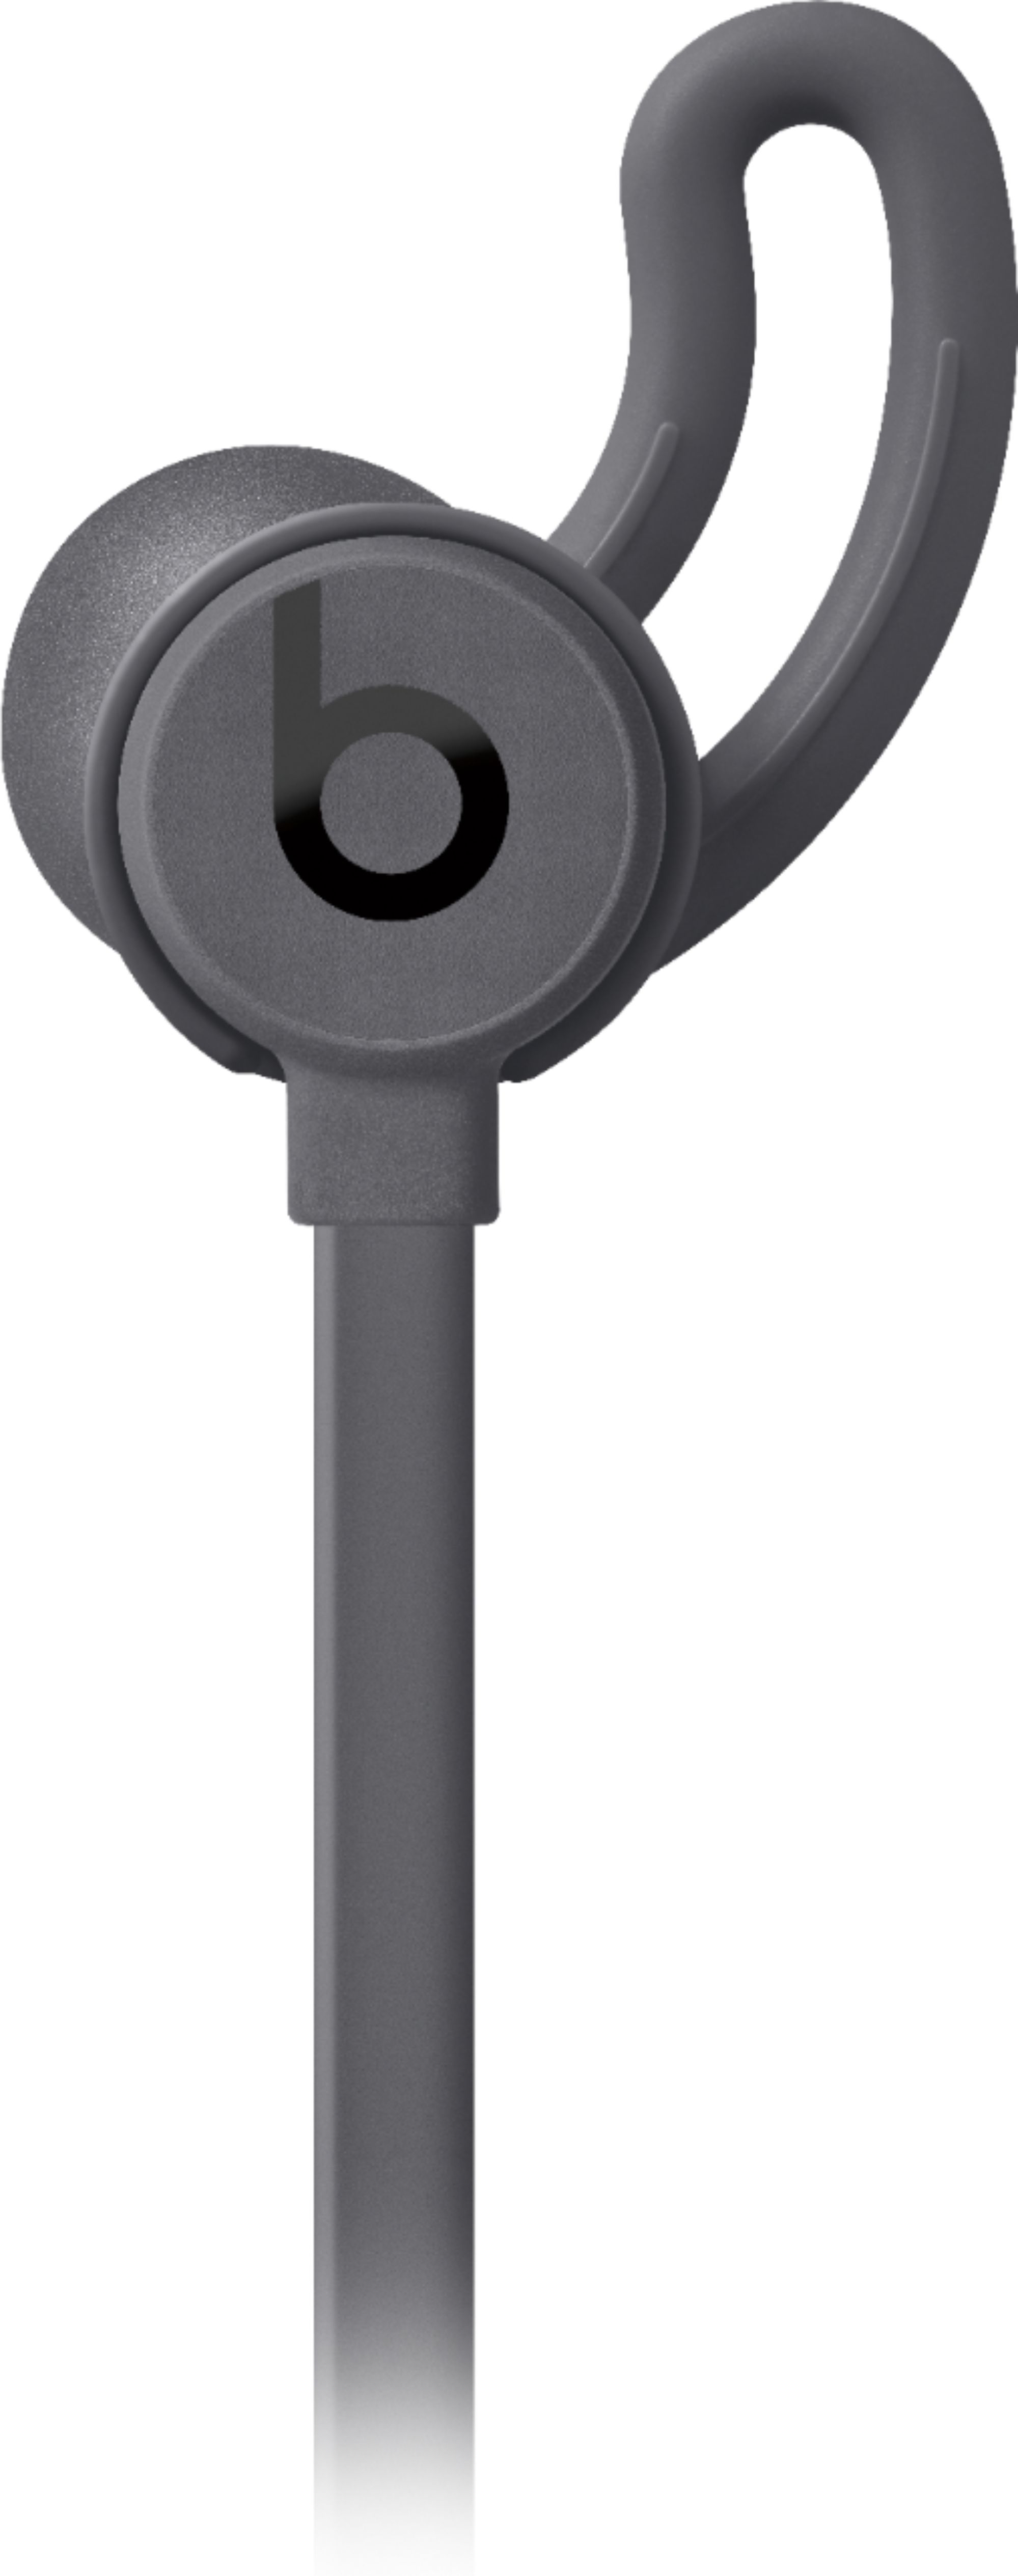 Questions and Answers: Beats urBeats³ Earphones with 3.5mm Plug Gray ...